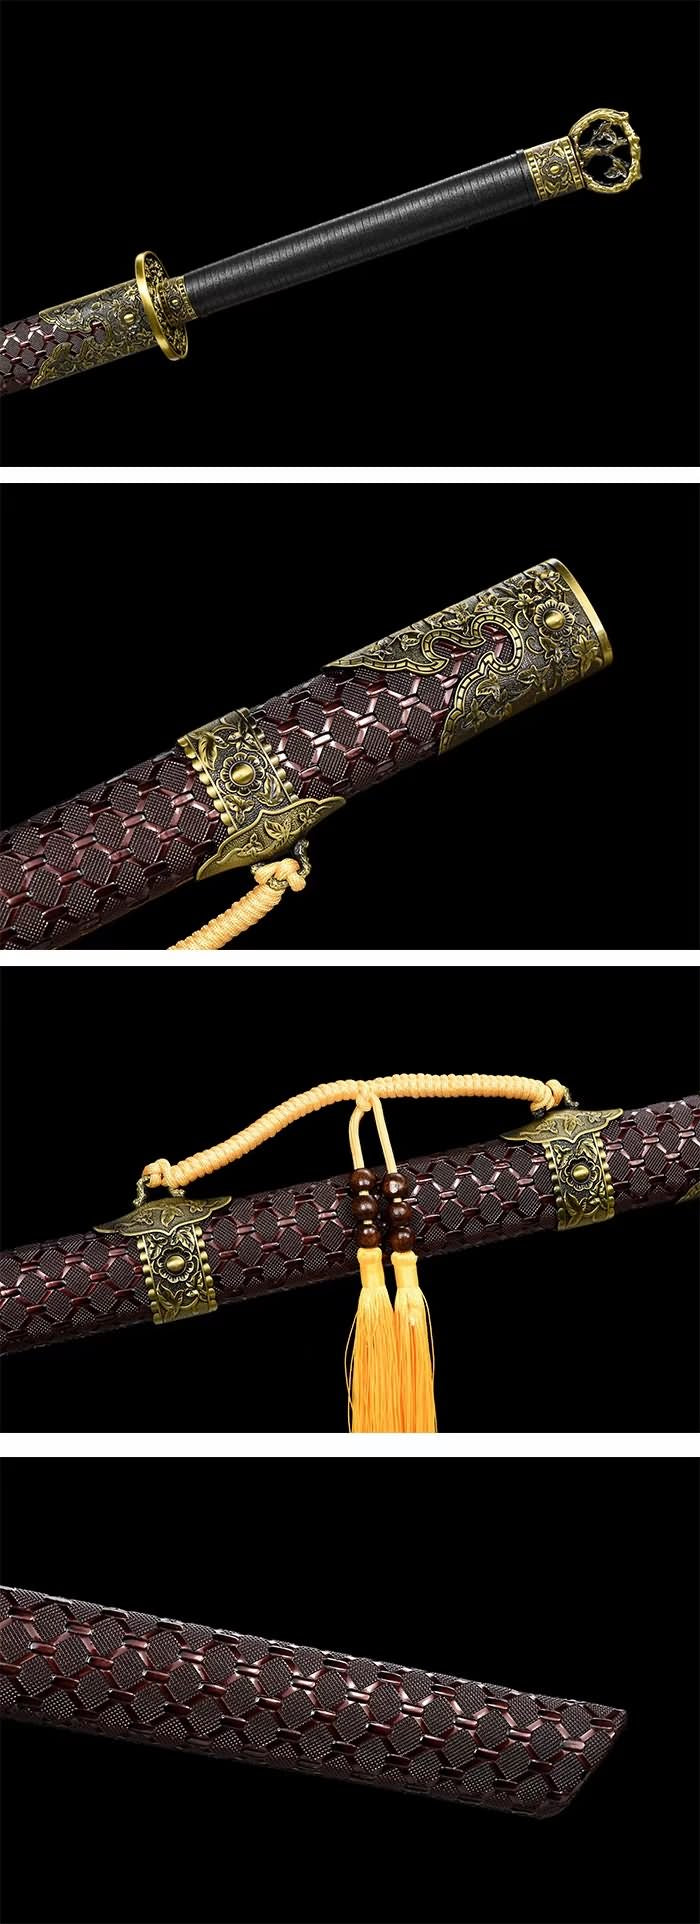 Chinese Tang Hengdao Sword-Forged Spring Steel Blade, Rosewood Scabbard